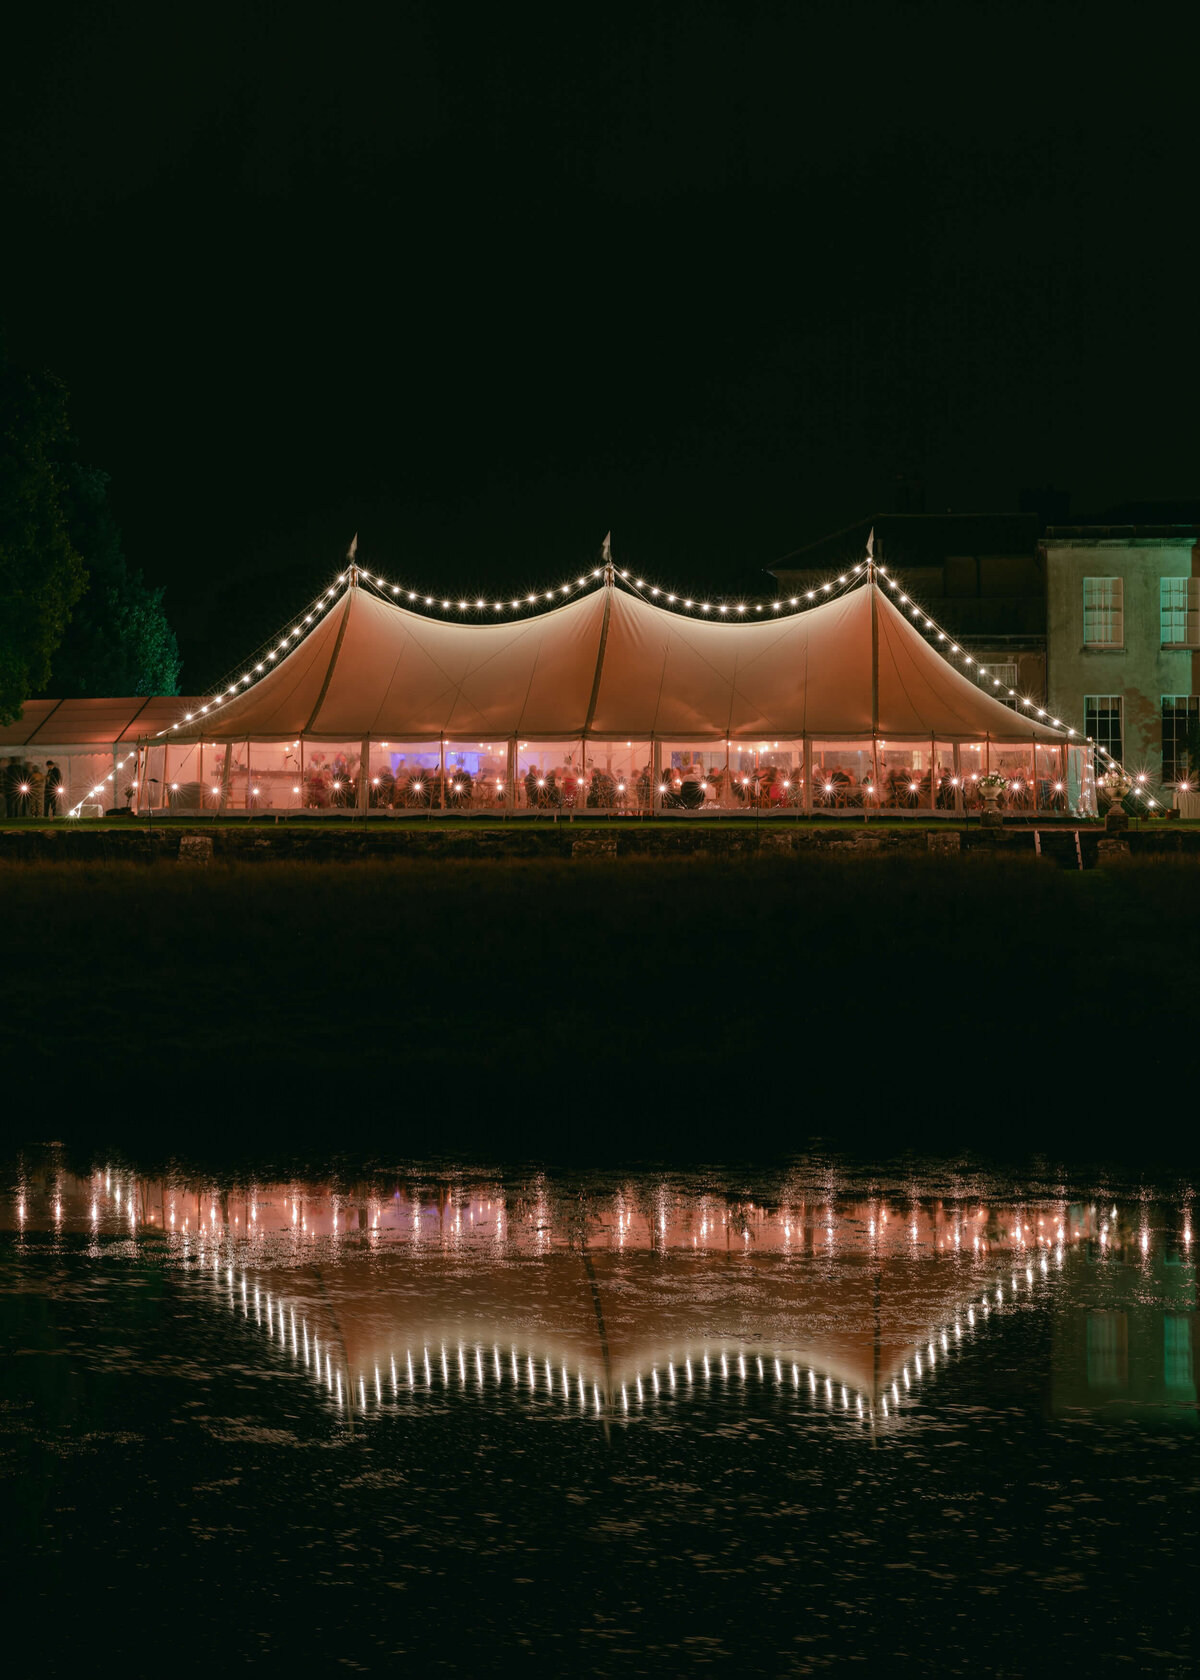 chloe-winstanley-weddings-sailcloth-tent-night-lights-relection